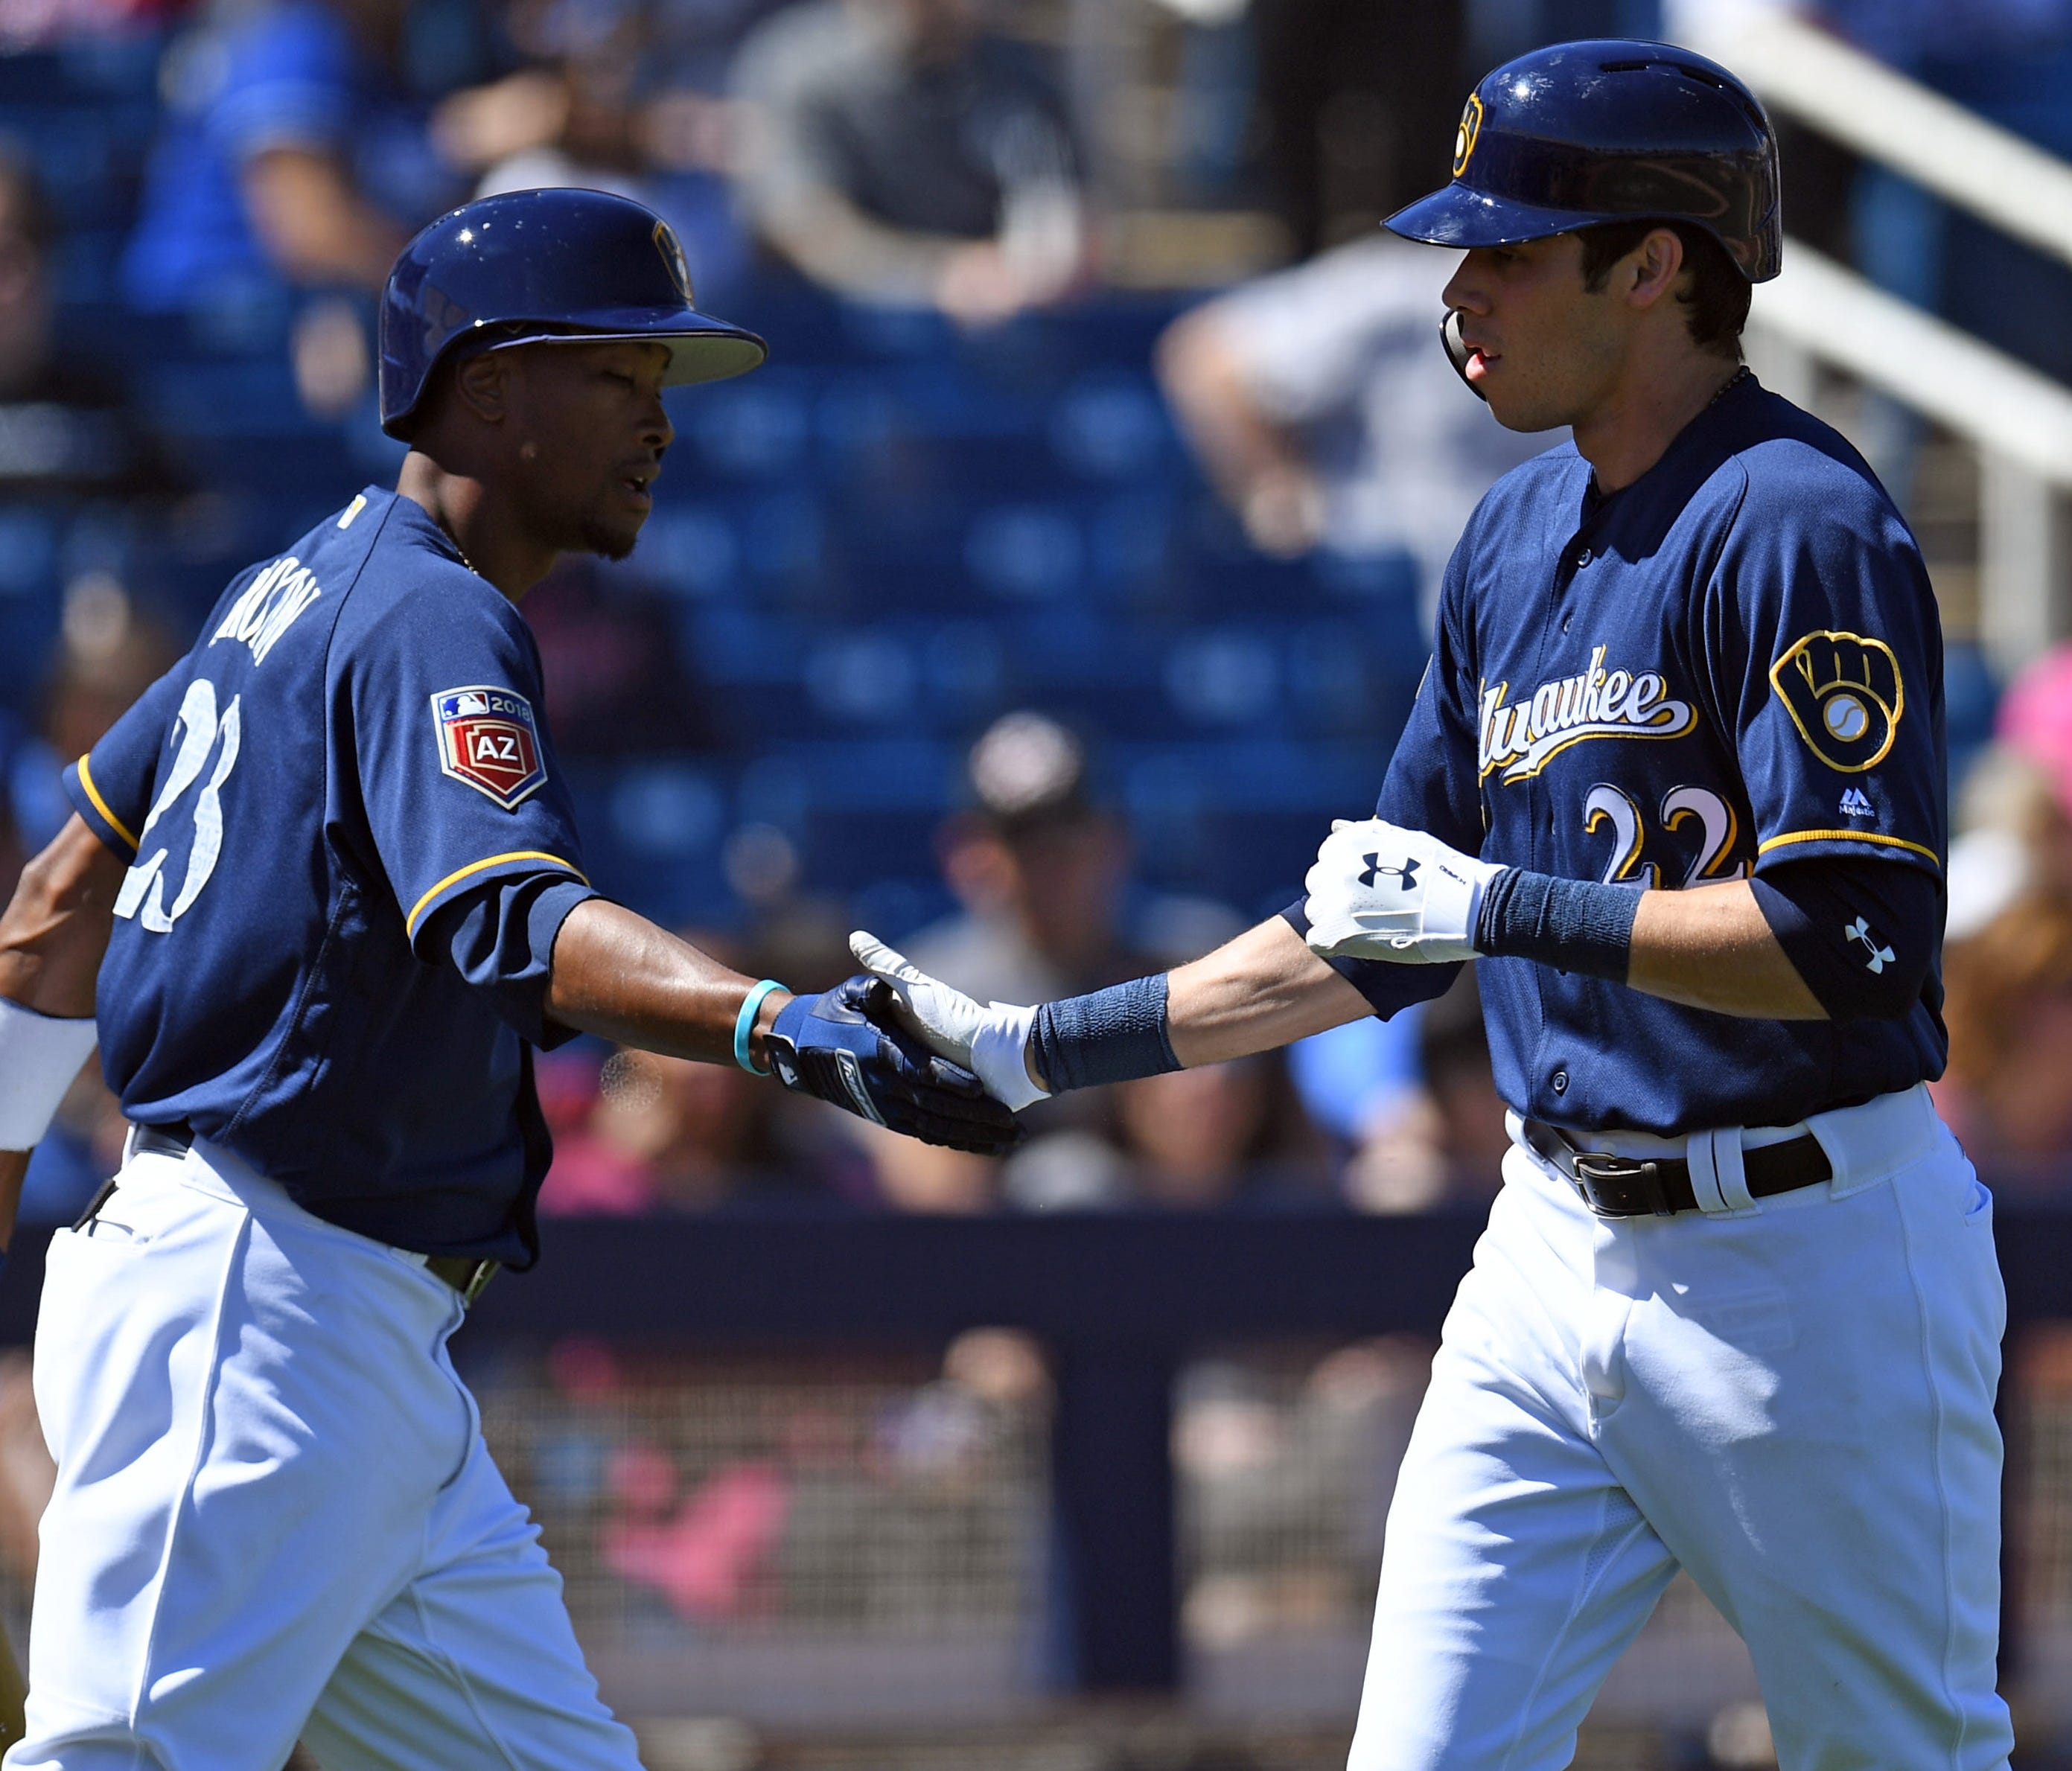 Brewers fans were thrilled with the acquisition of Christian Yelich, but it's left Keon Broxton, left, and others with nowhere to play.